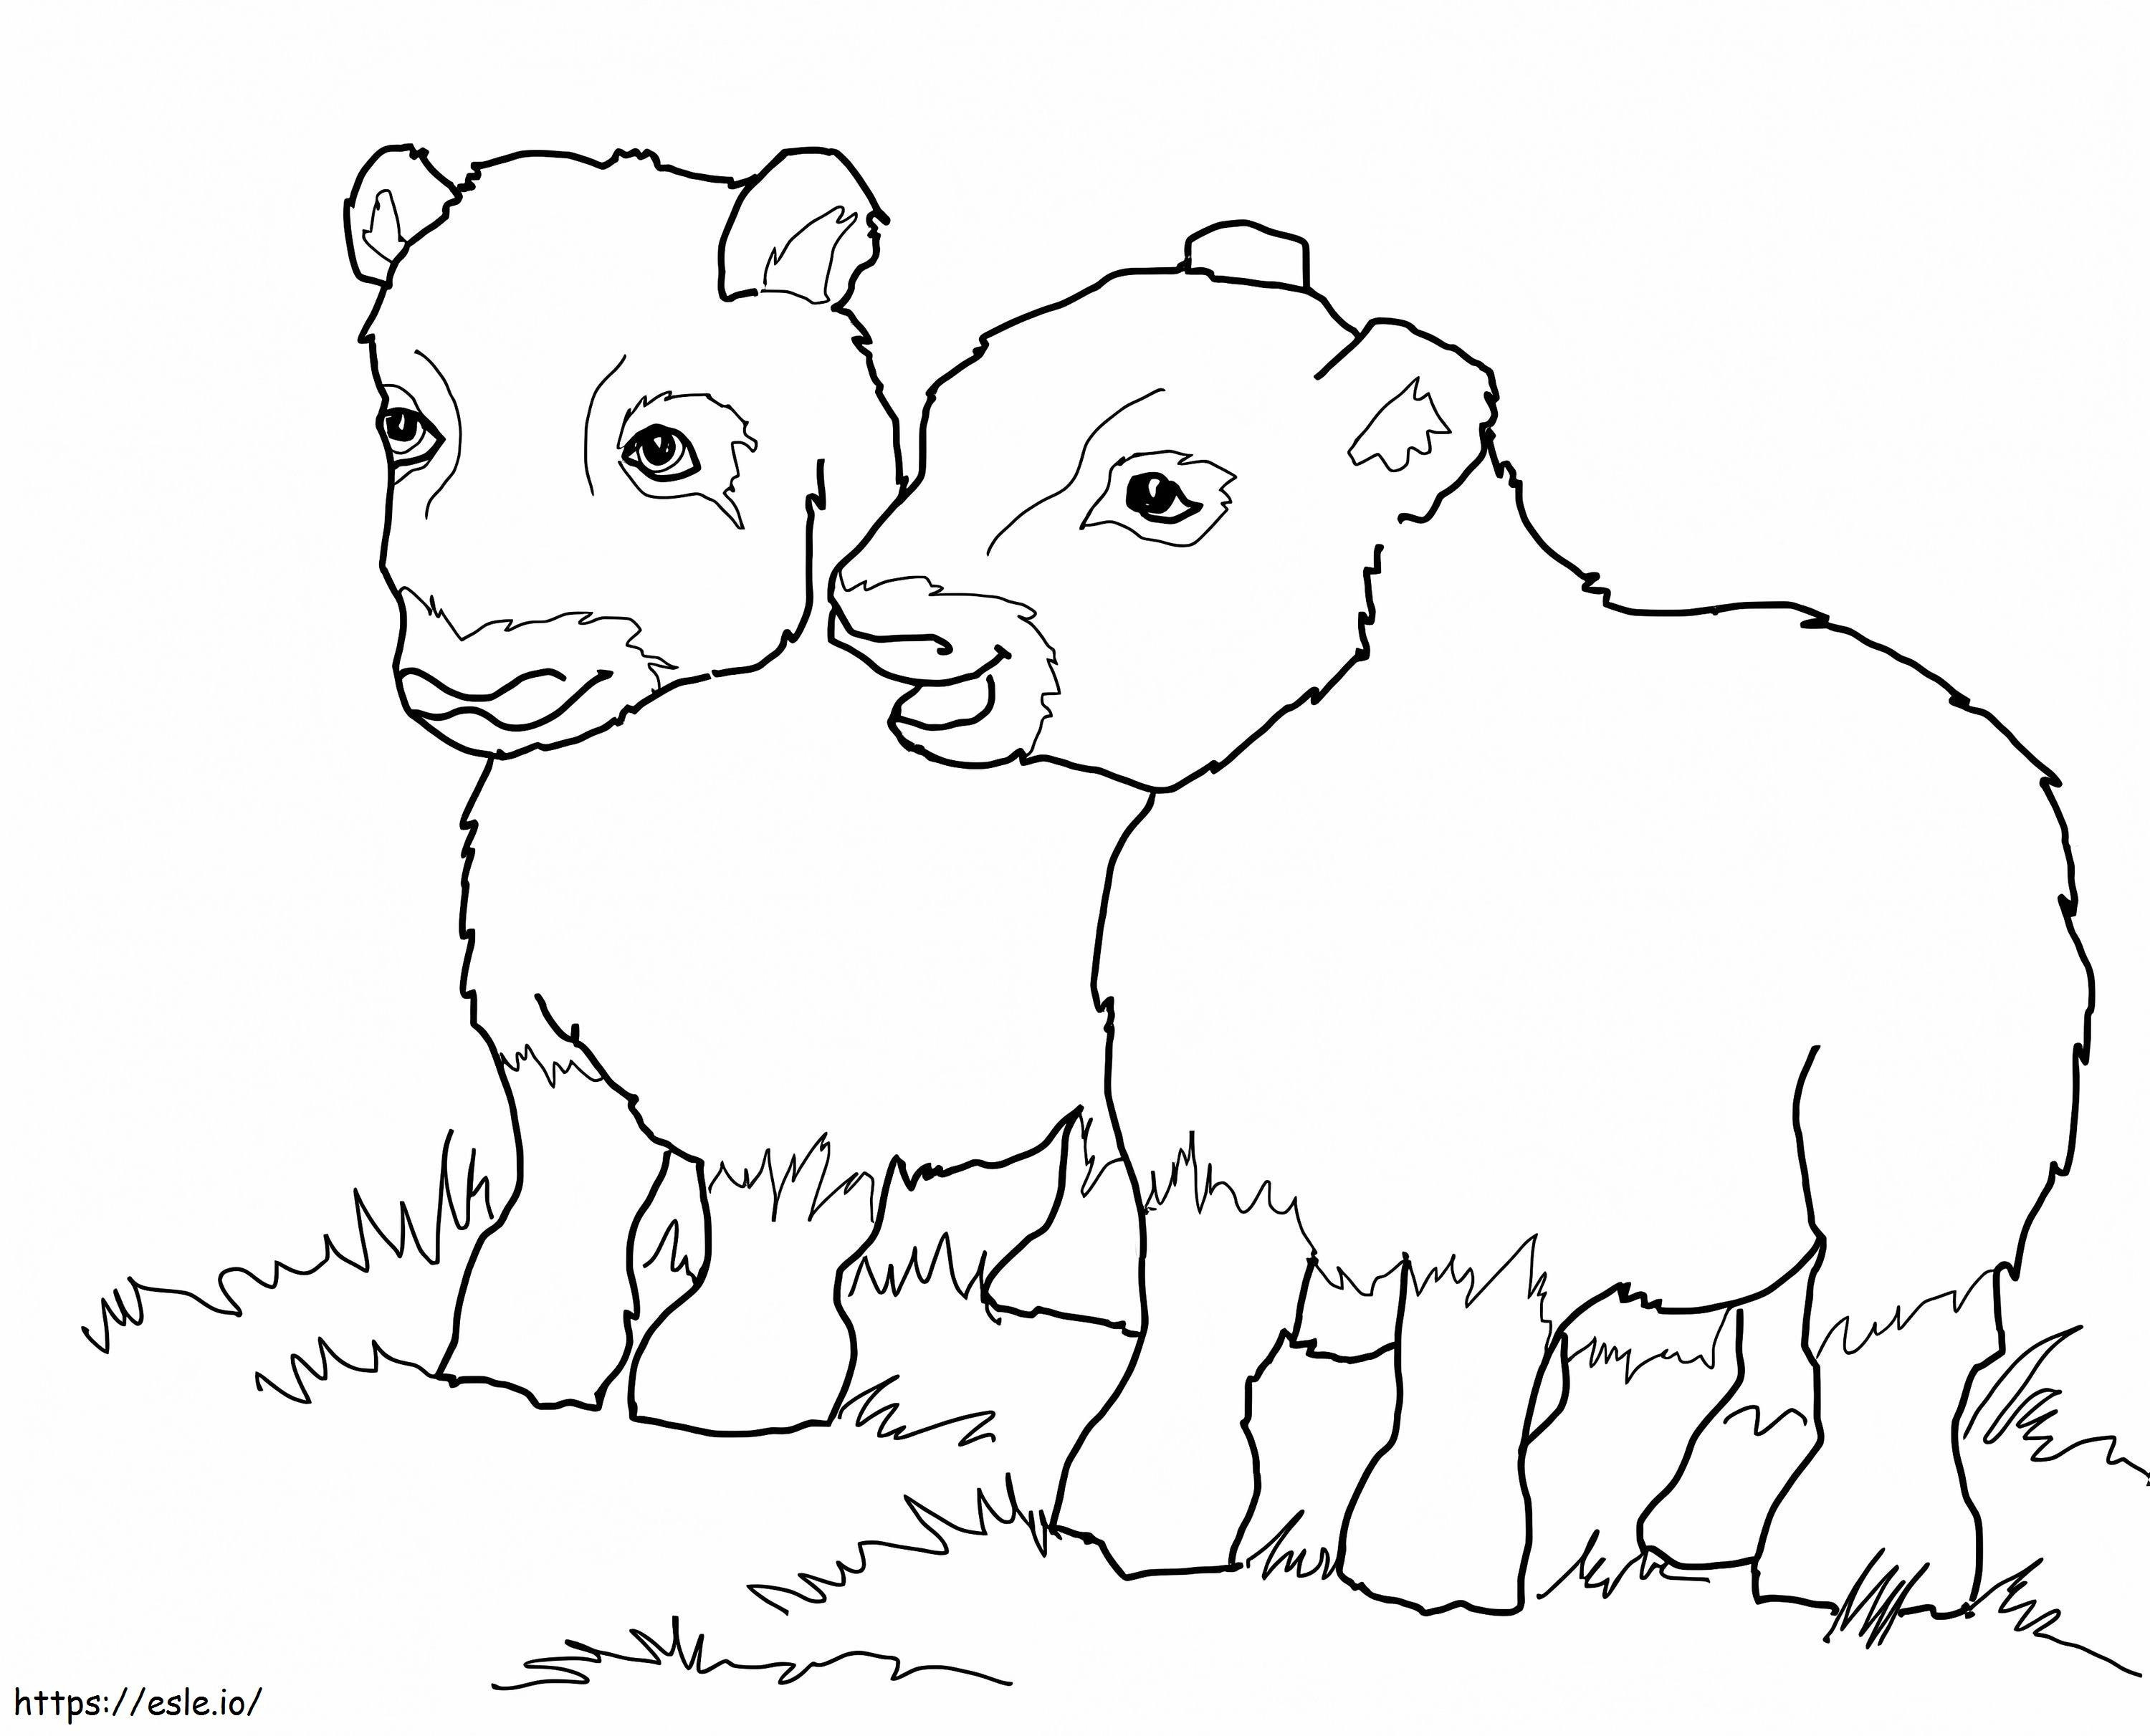 Musk Ox Babies coloring page